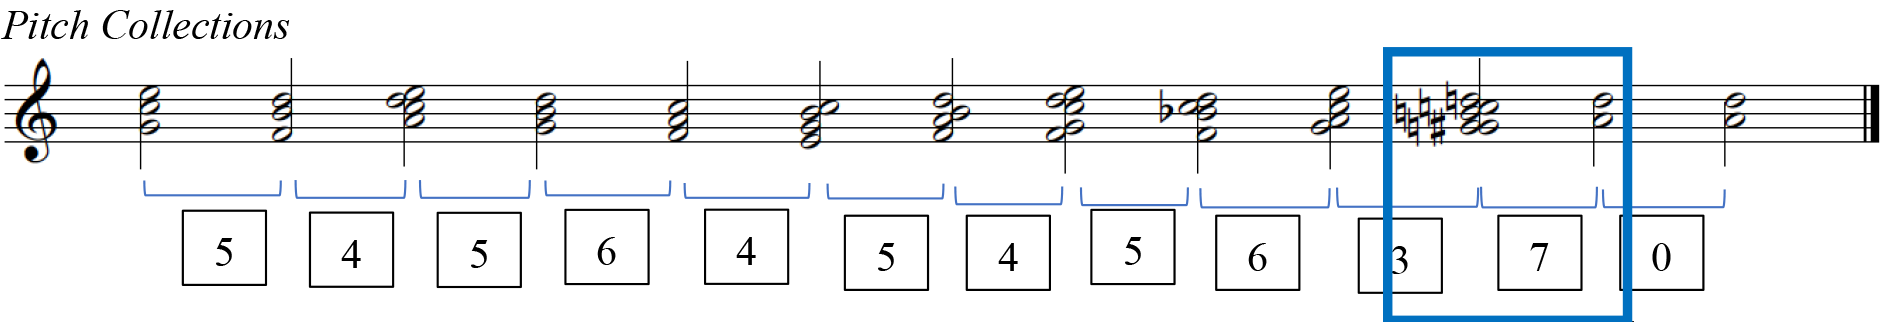 A staff labeled Pitch Collections with a treble clef containing notes and corresponding numbers between them. More in description below.